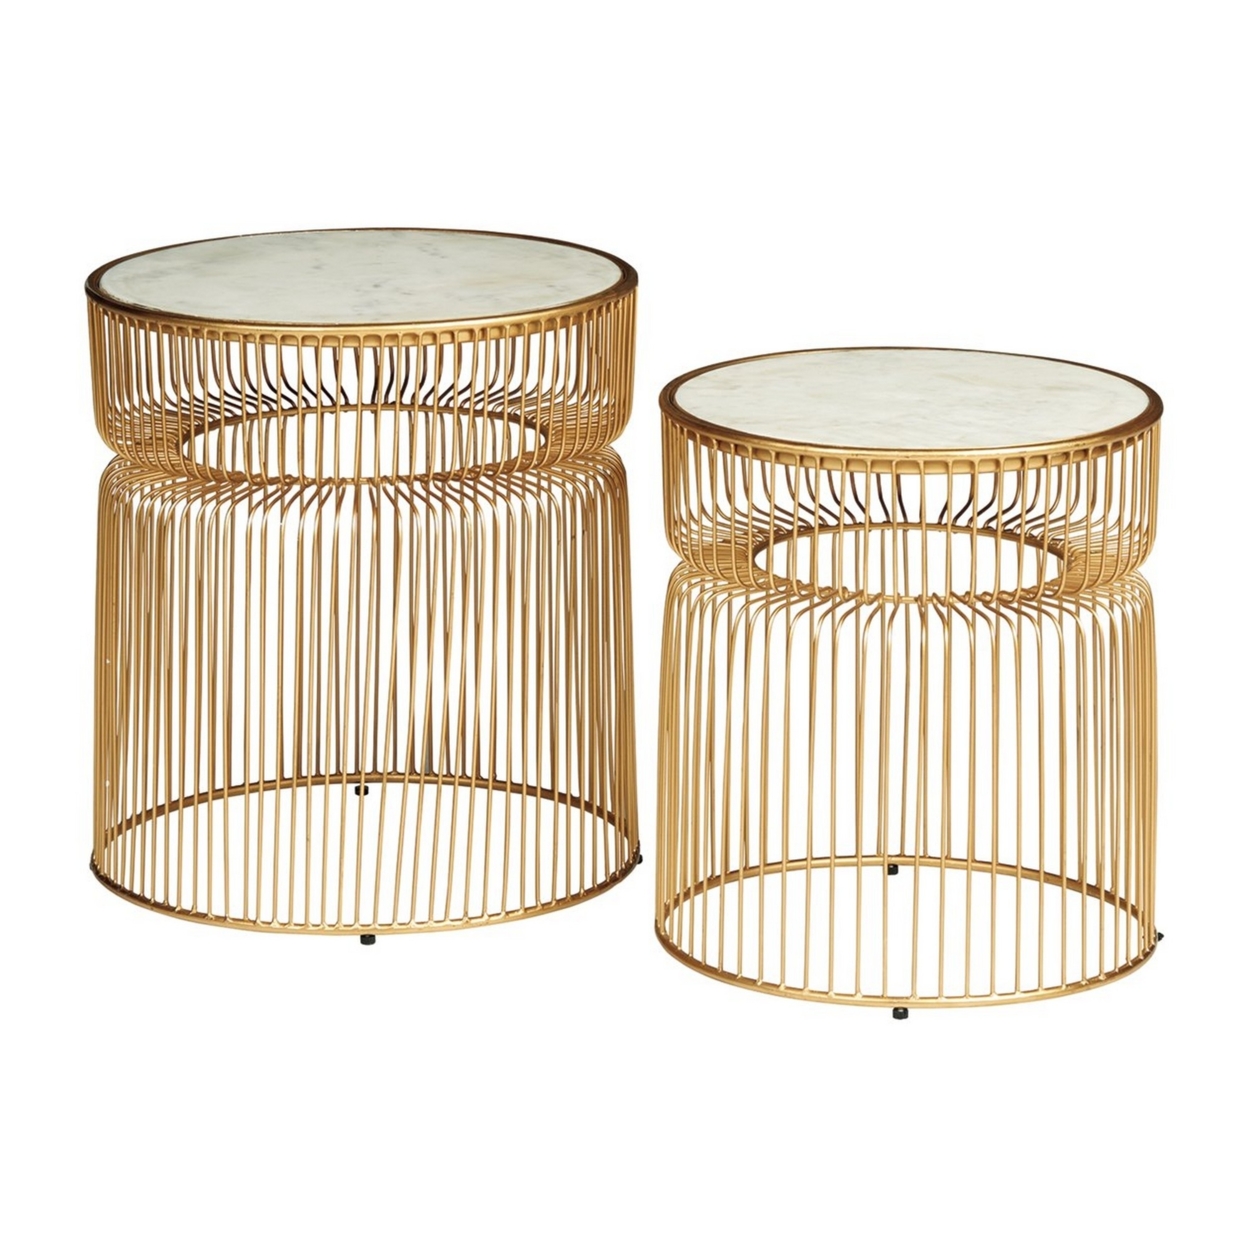 Round Marble Top Accent Table With Metal Cage Design Base, Set Of 2, Gold- Saltoro Sherpi